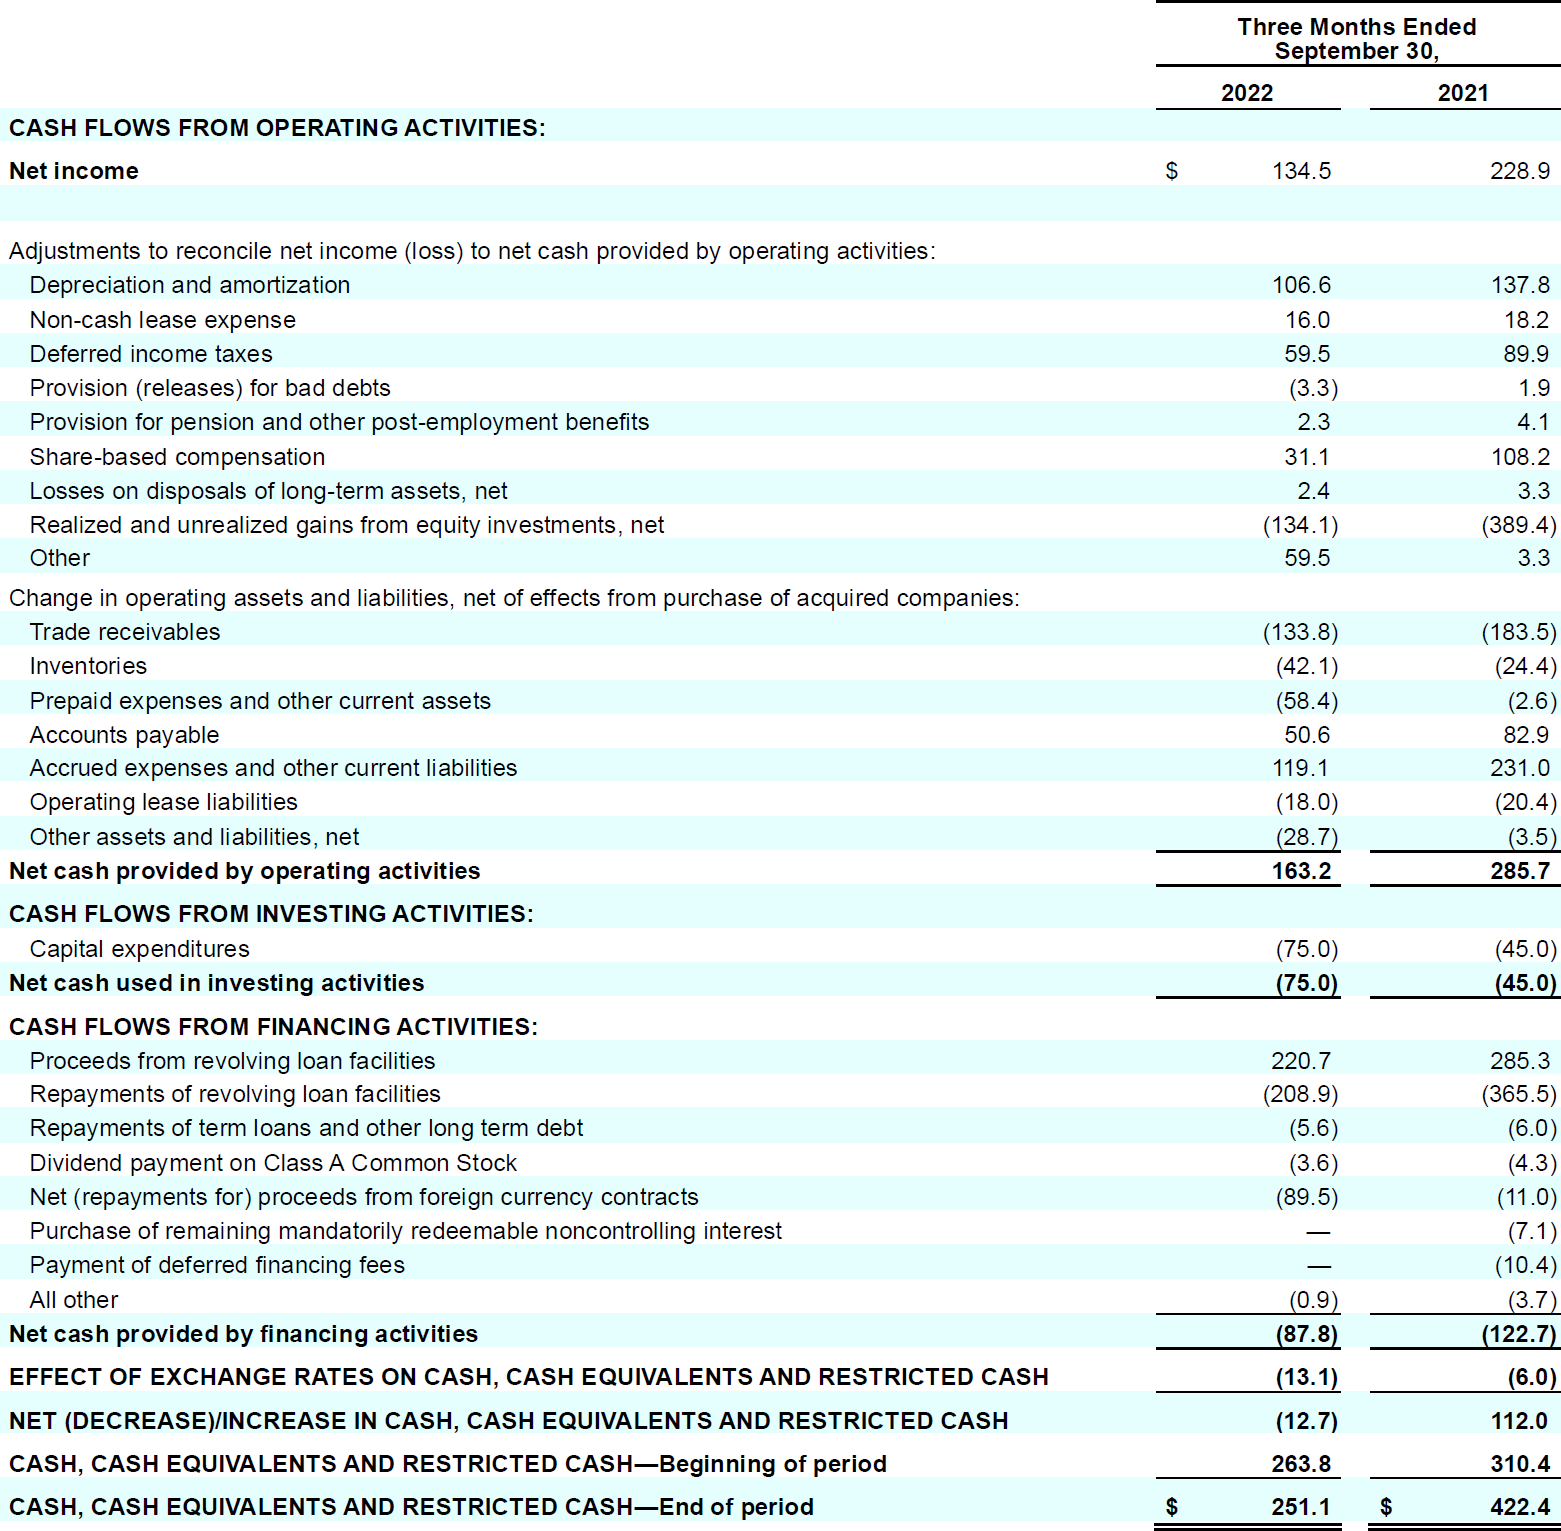 Coty 1Q23 Earnings Release - Table 18